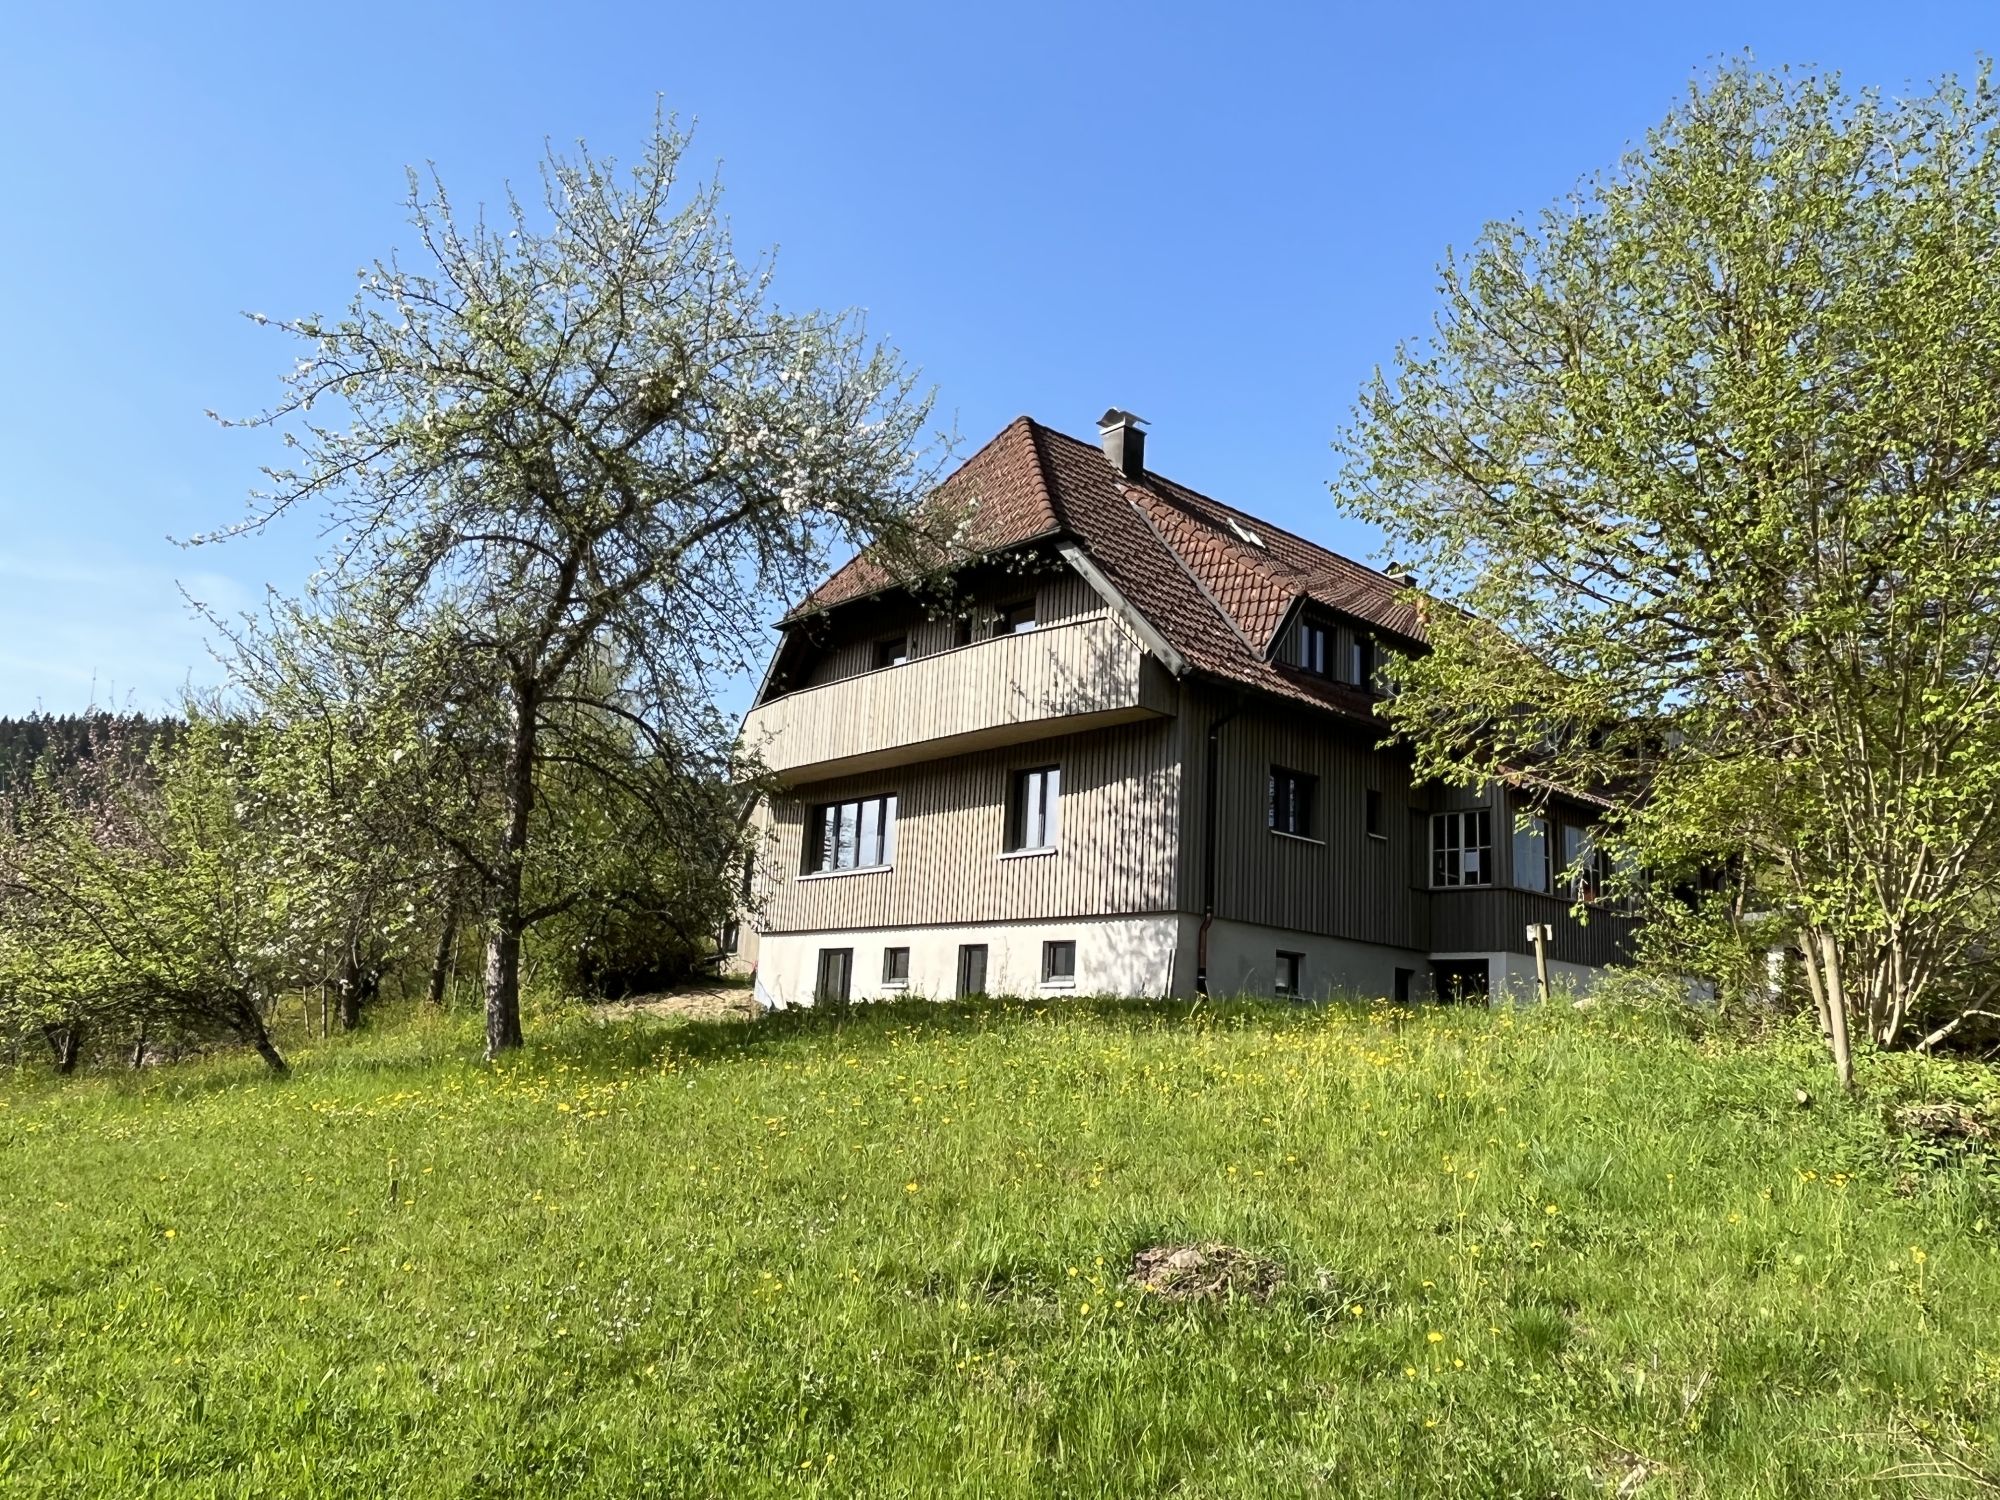 View of the Baiersbronn group house facing the valley in the Black Forest